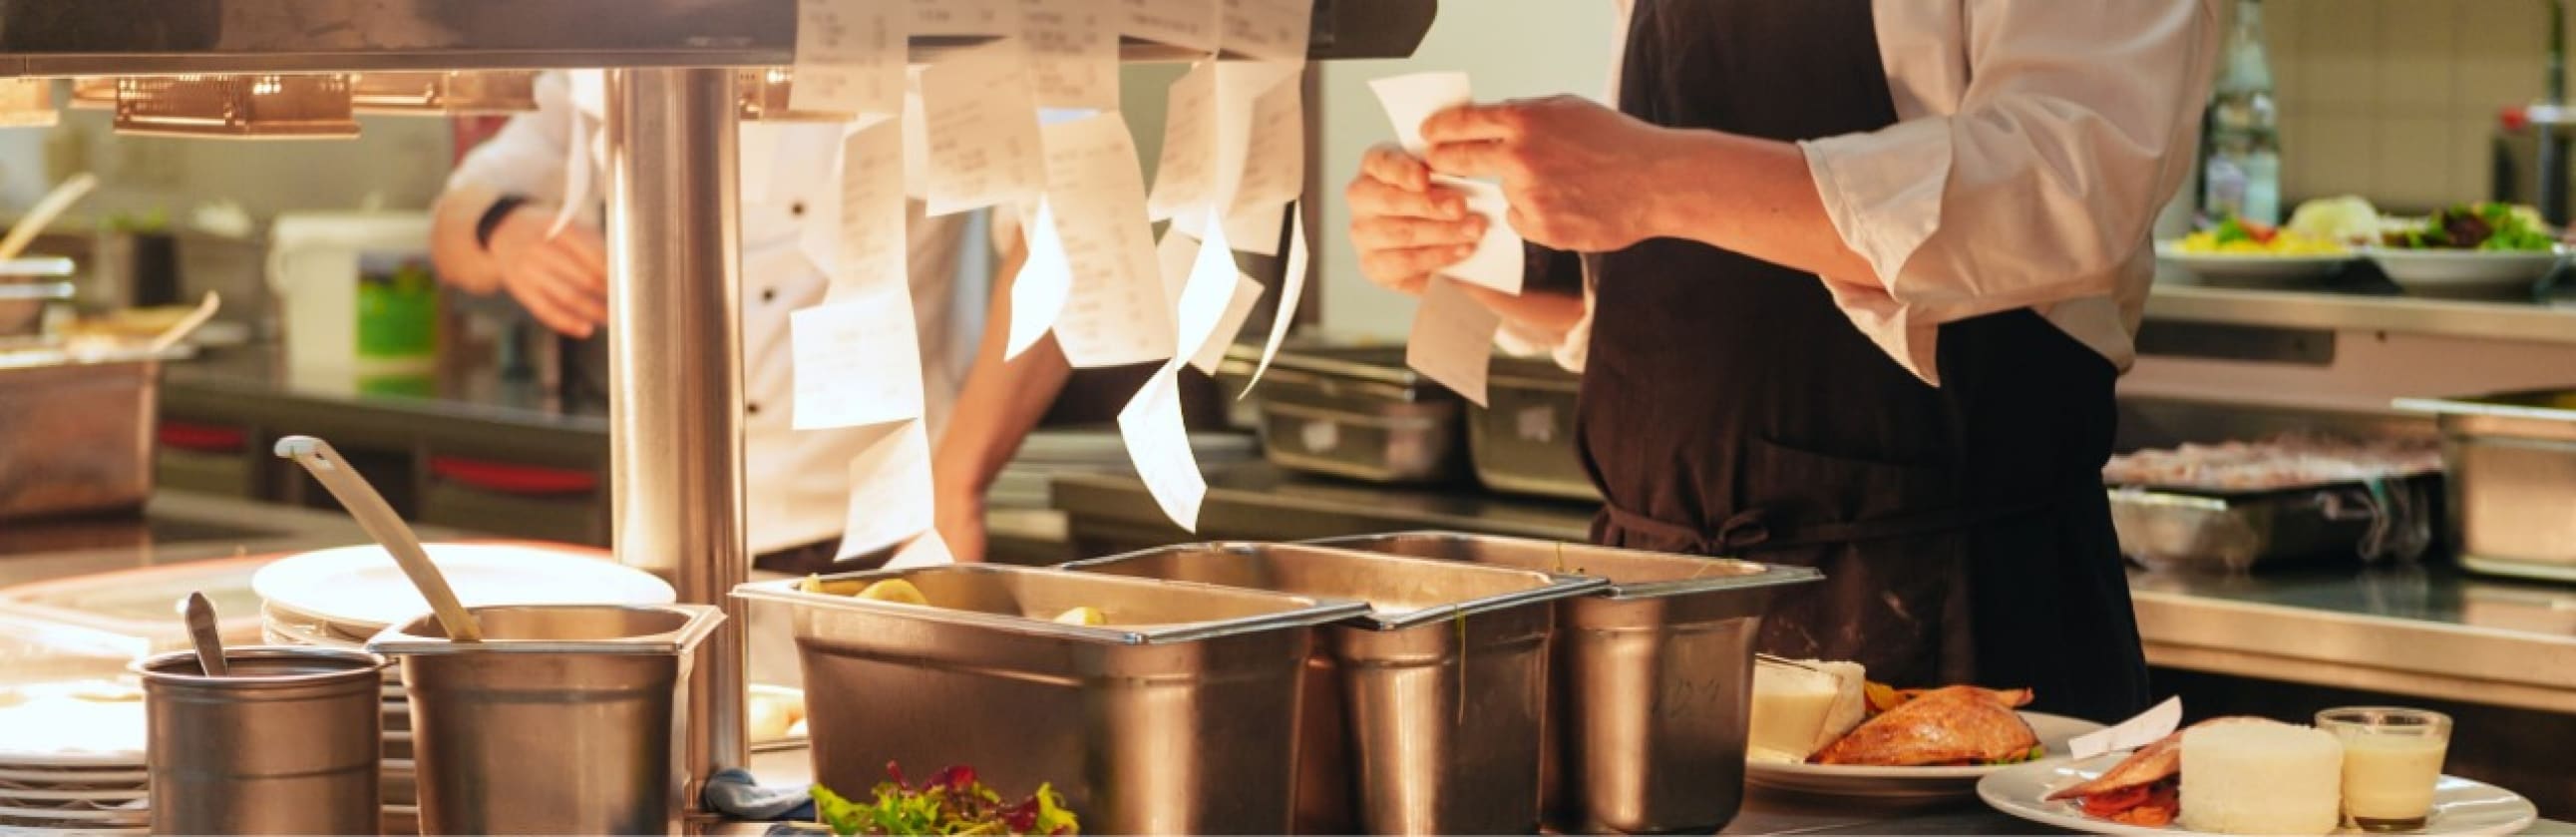 Lower Costs by Simplifying Your Menu